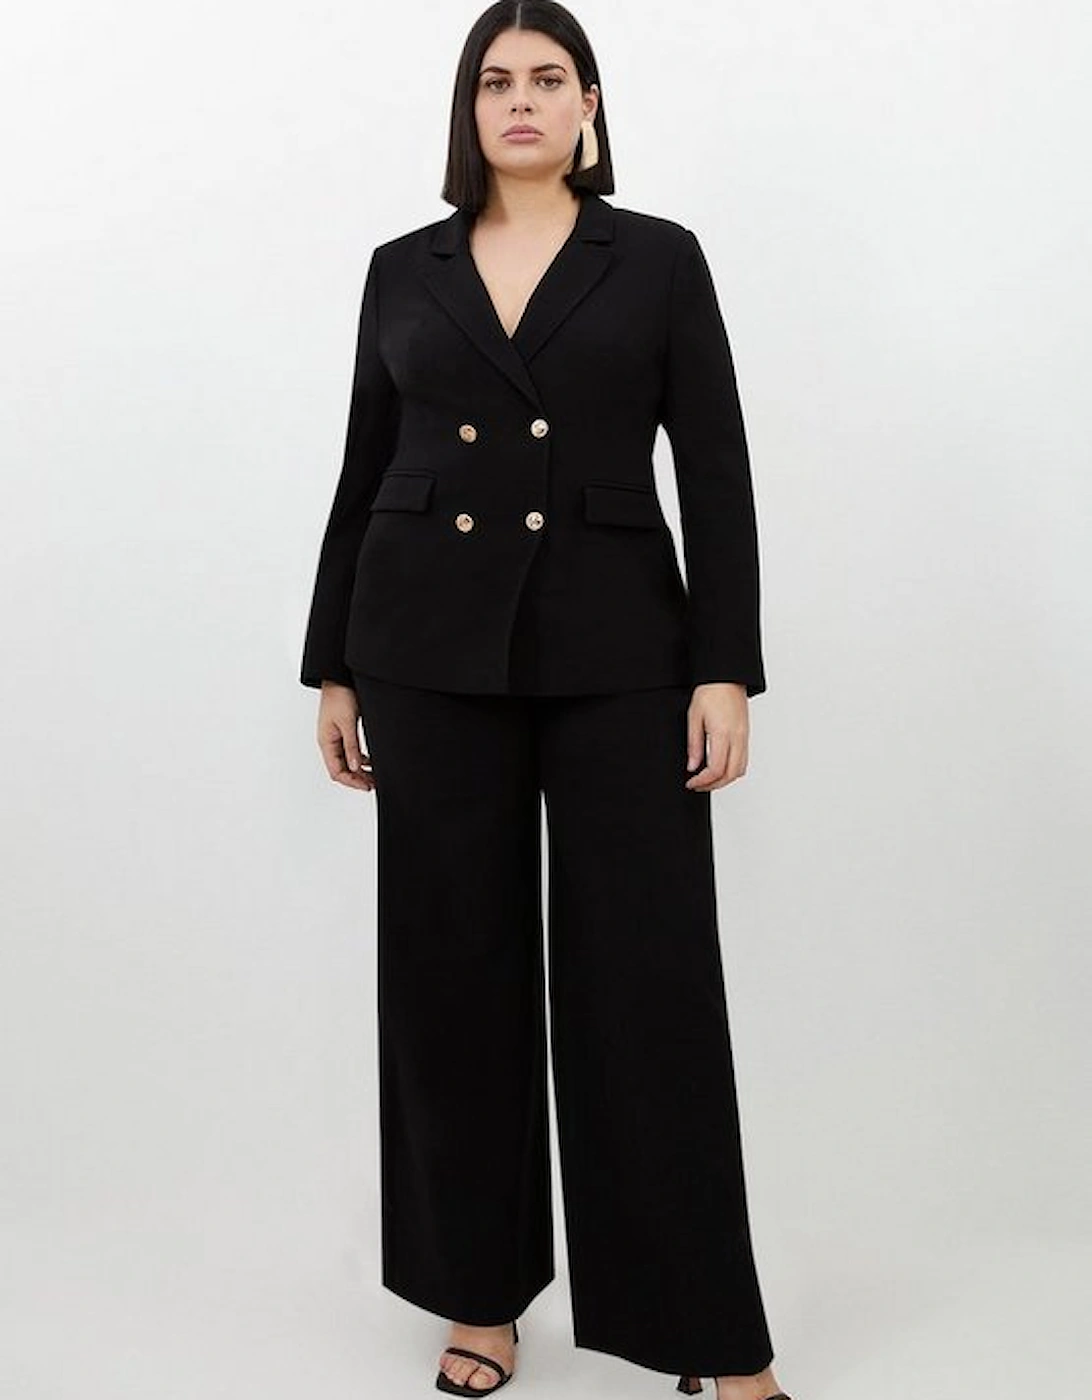 Plus Size Compact Essential Tailored Double Breasted Blazer